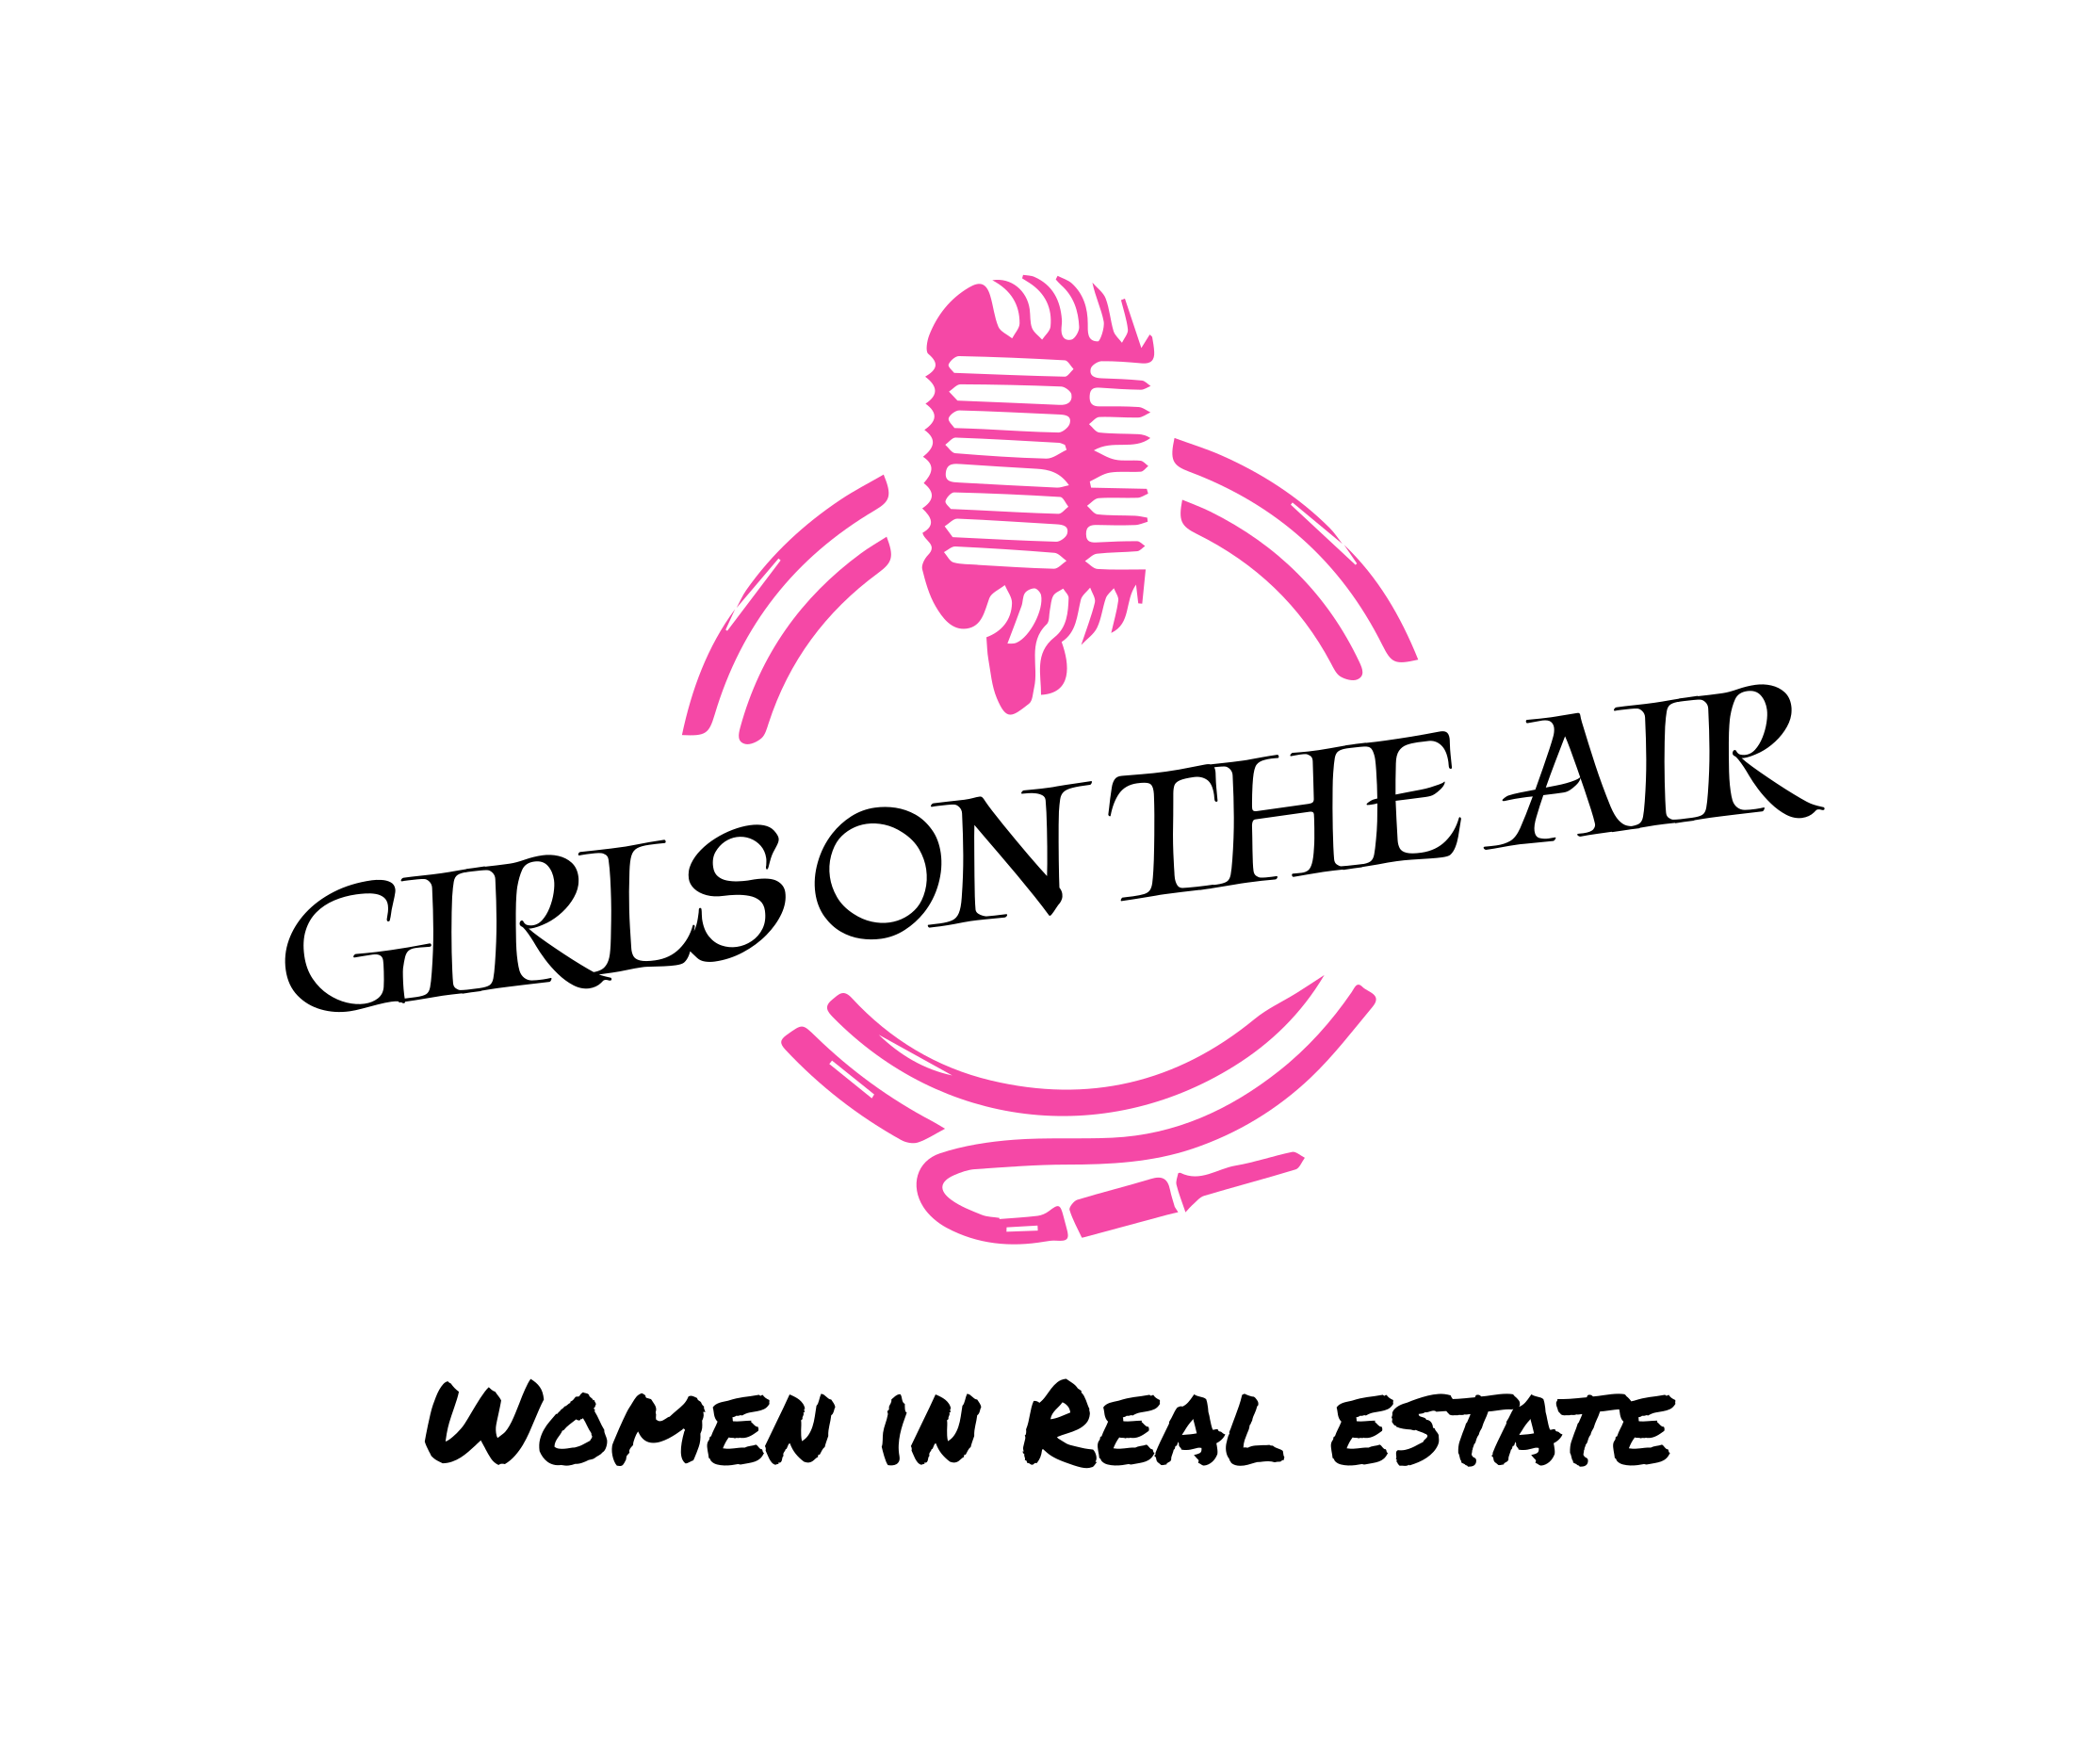 Girls on the Air, Real Women in Real Estate: Real Estate Sales and Rentals in Ventura County